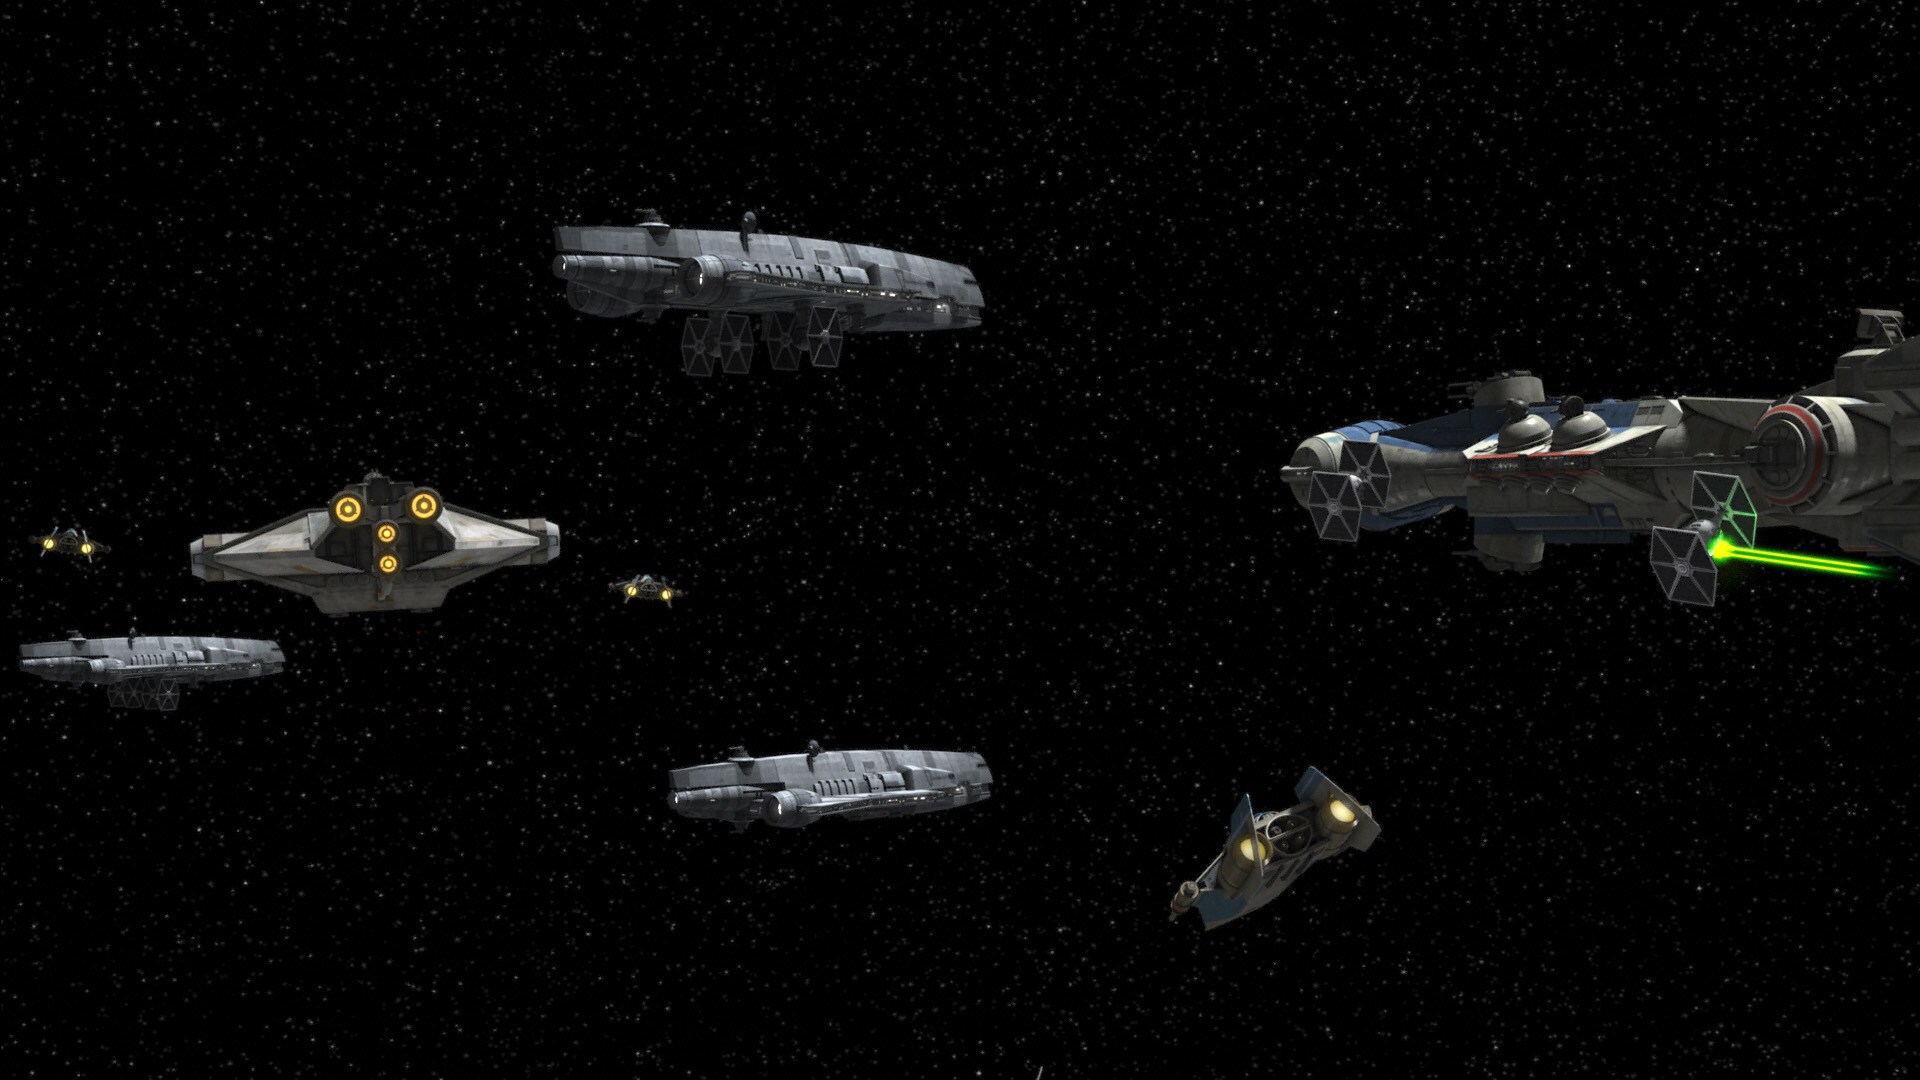 Now linked with a larger rebel cell, our heroes lead a mission to steal cargo from an Imperial co...